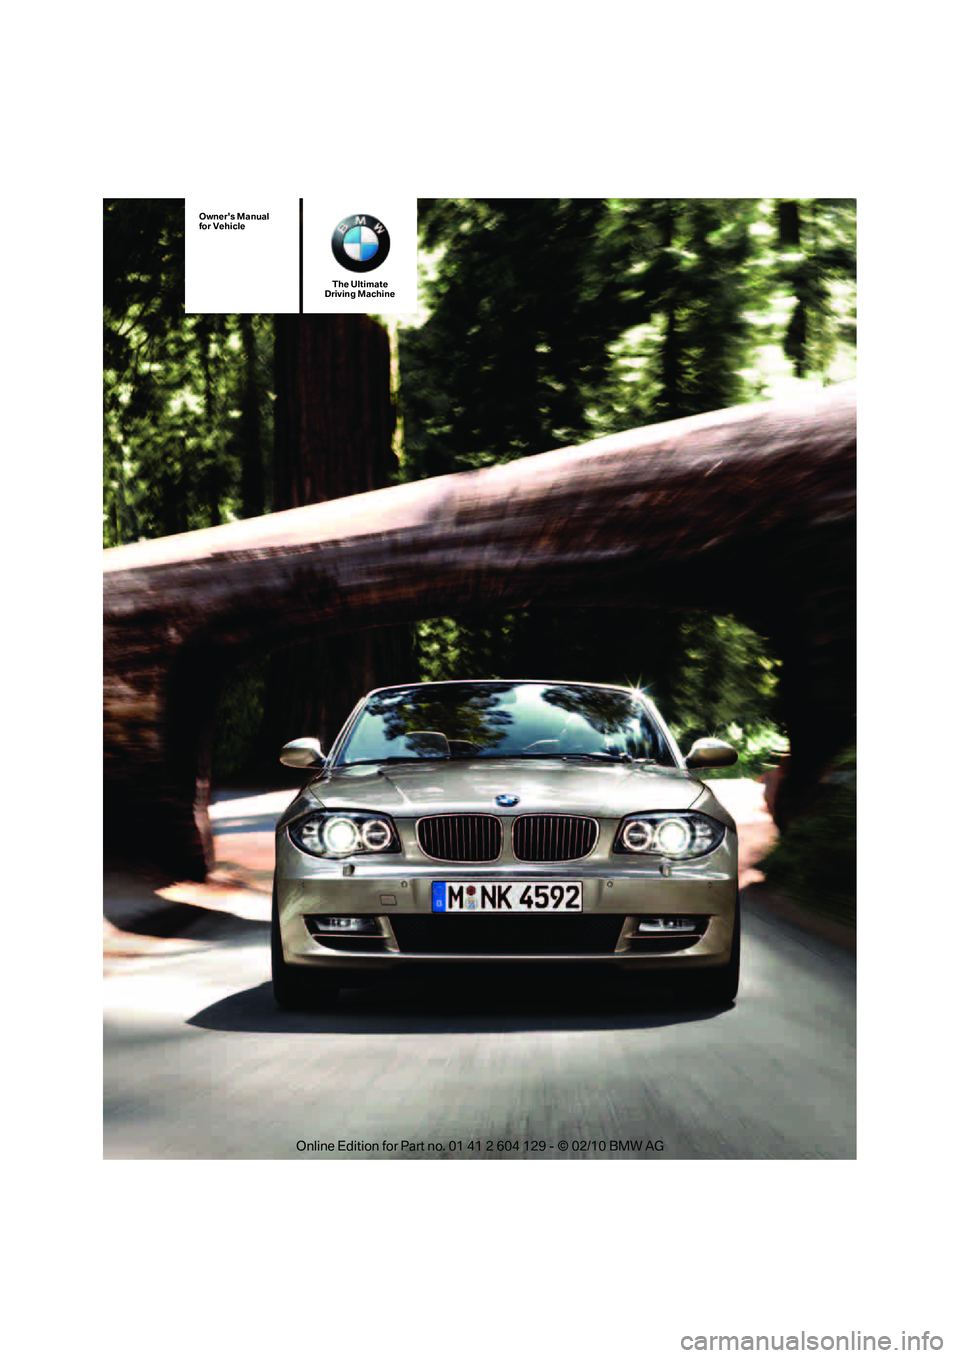 BMW 1 SERIES 2011  Owners Manual The Ultimate
Driving Machine
Owners Manual
for Vehicle 